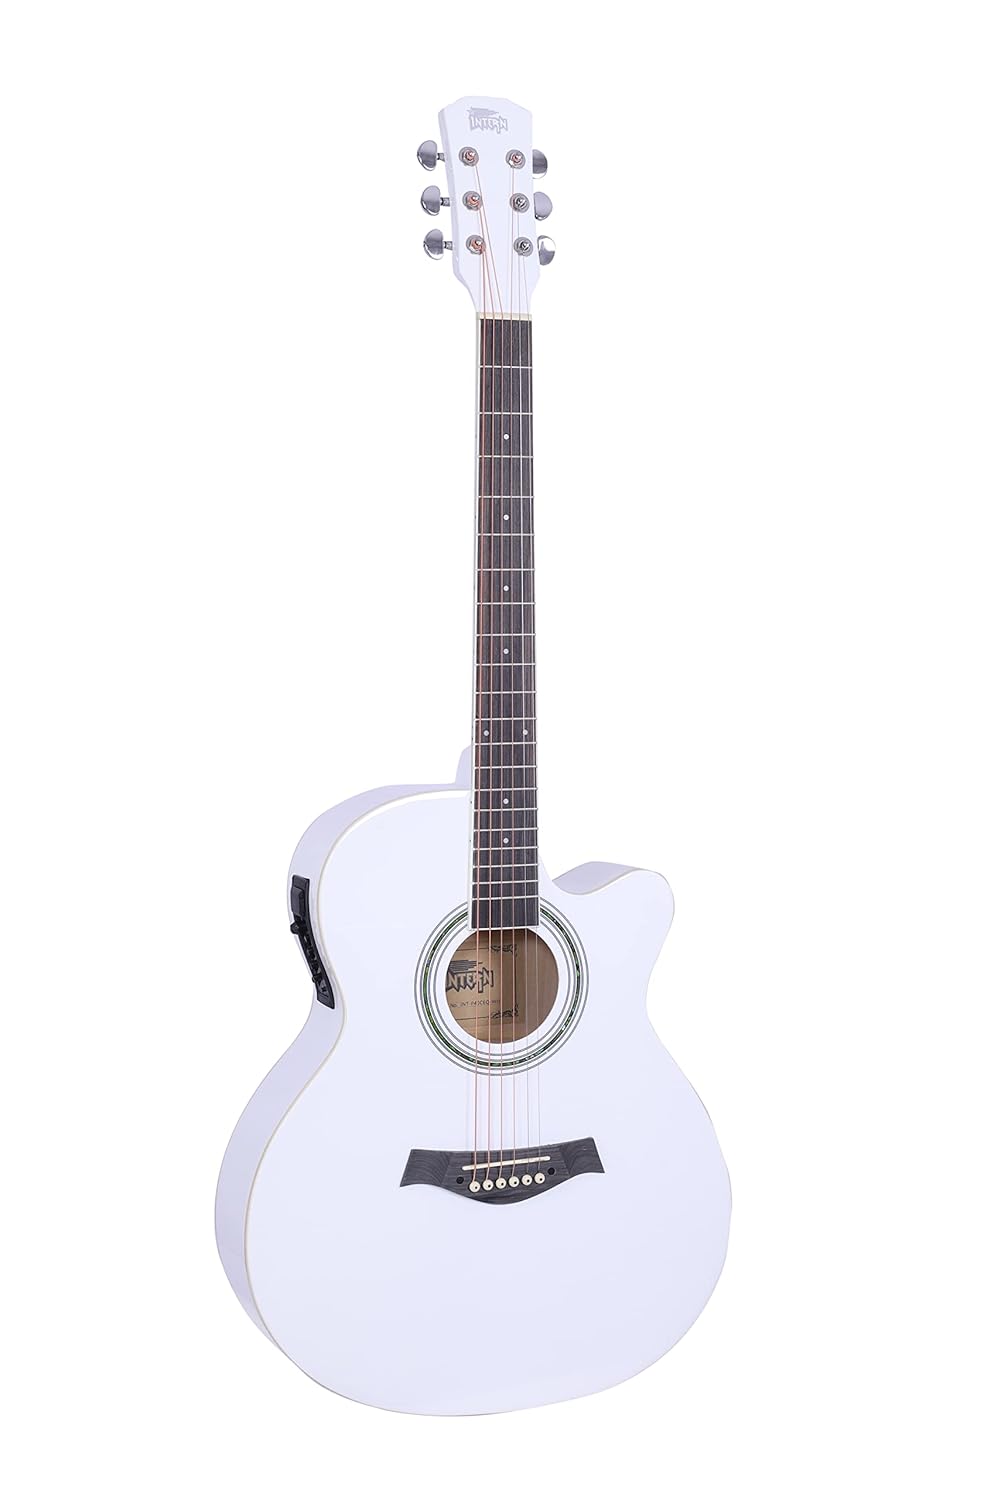 INTERN 40 inches Acoustic Guitar with Pick-up & truss rod, carry bag, strings pack, strap & picks. Premium Wooden durable built, Best tonal stability with professional sound amplificaiton. (White).